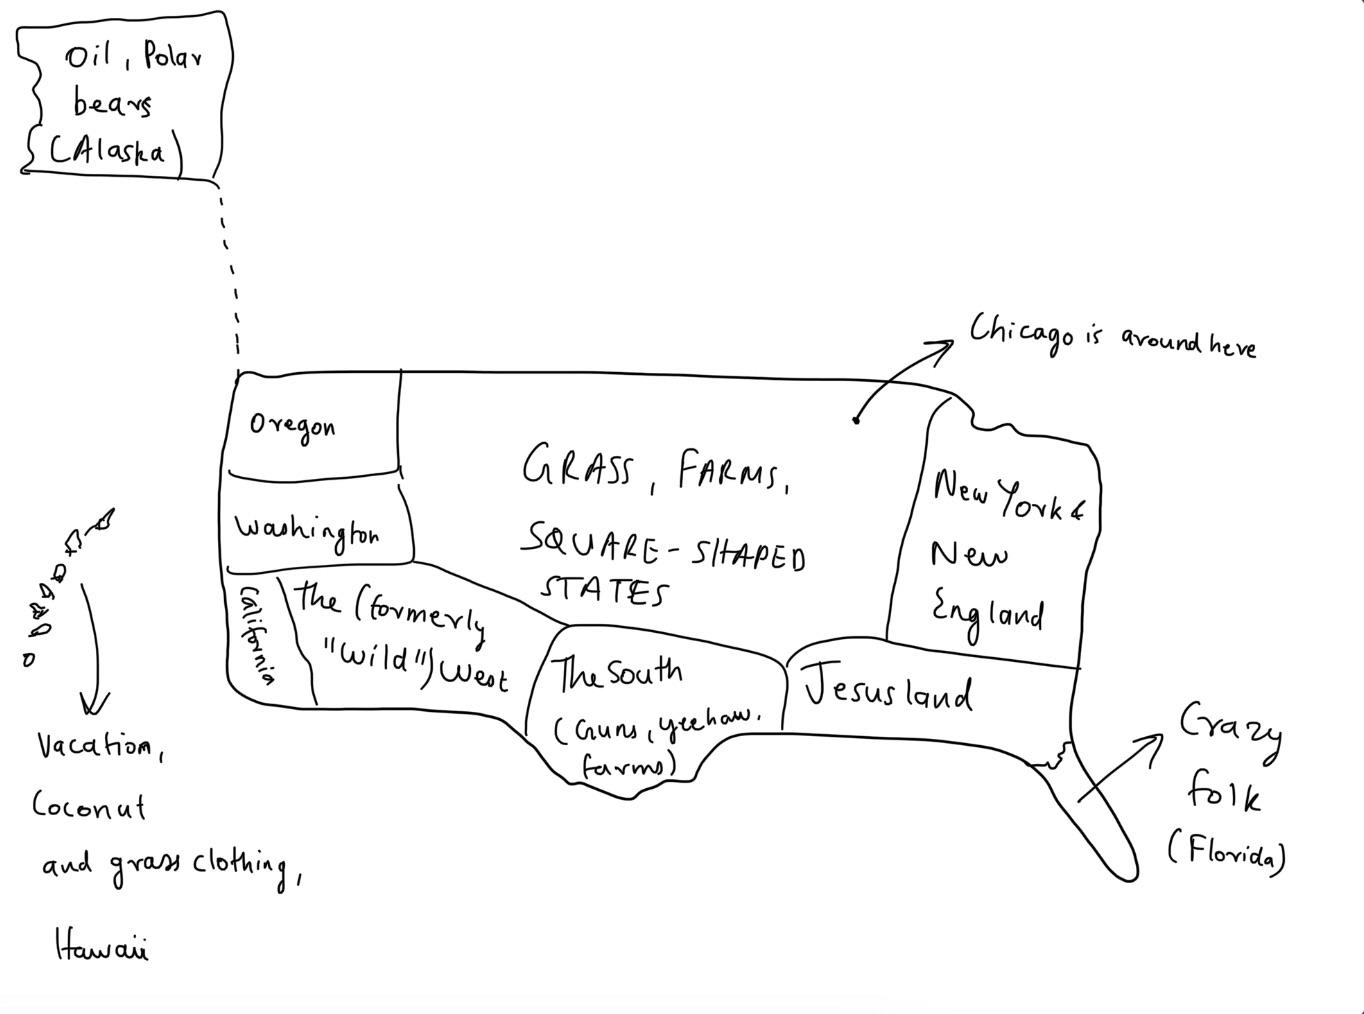 I was challenged to draw a map of the U.S. by a friend. My apologies to any American who sees this.